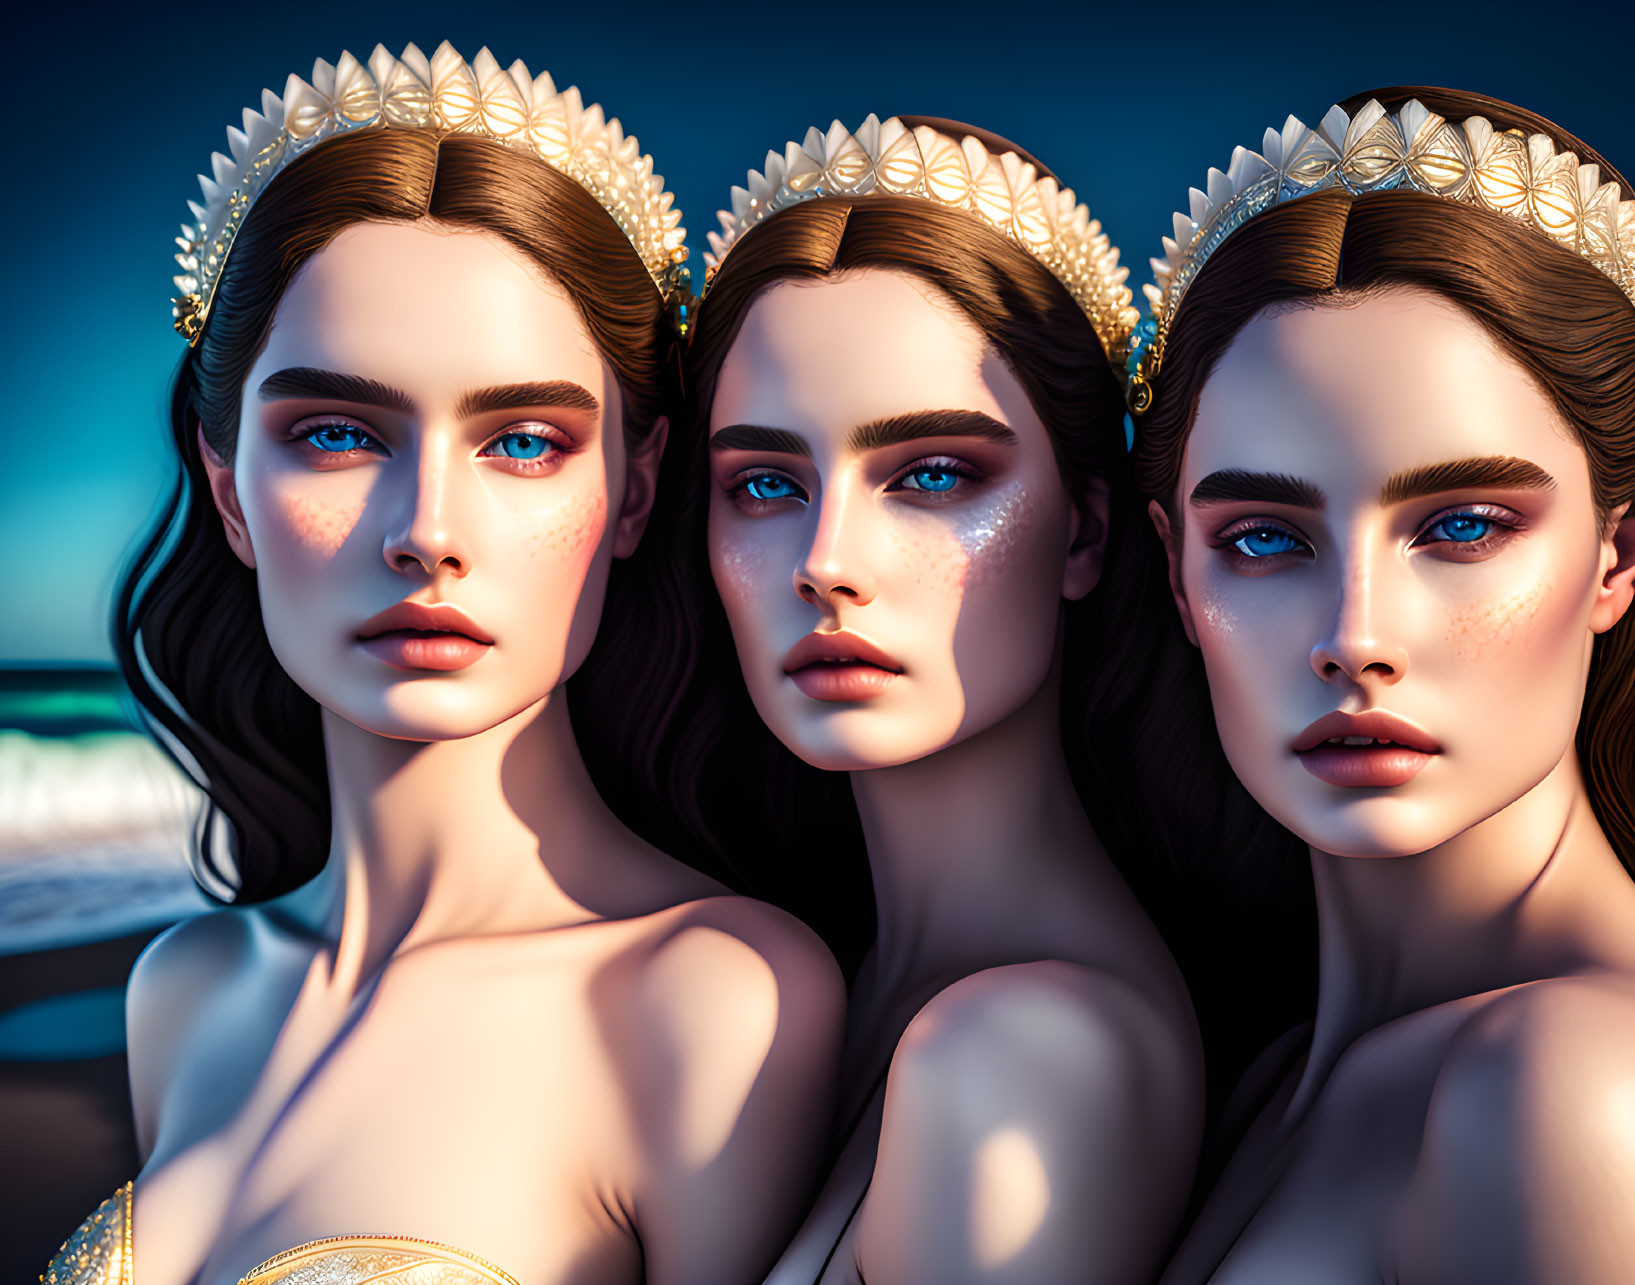 Three Women with Tiaras and Blue Eyes Posing by Ocean